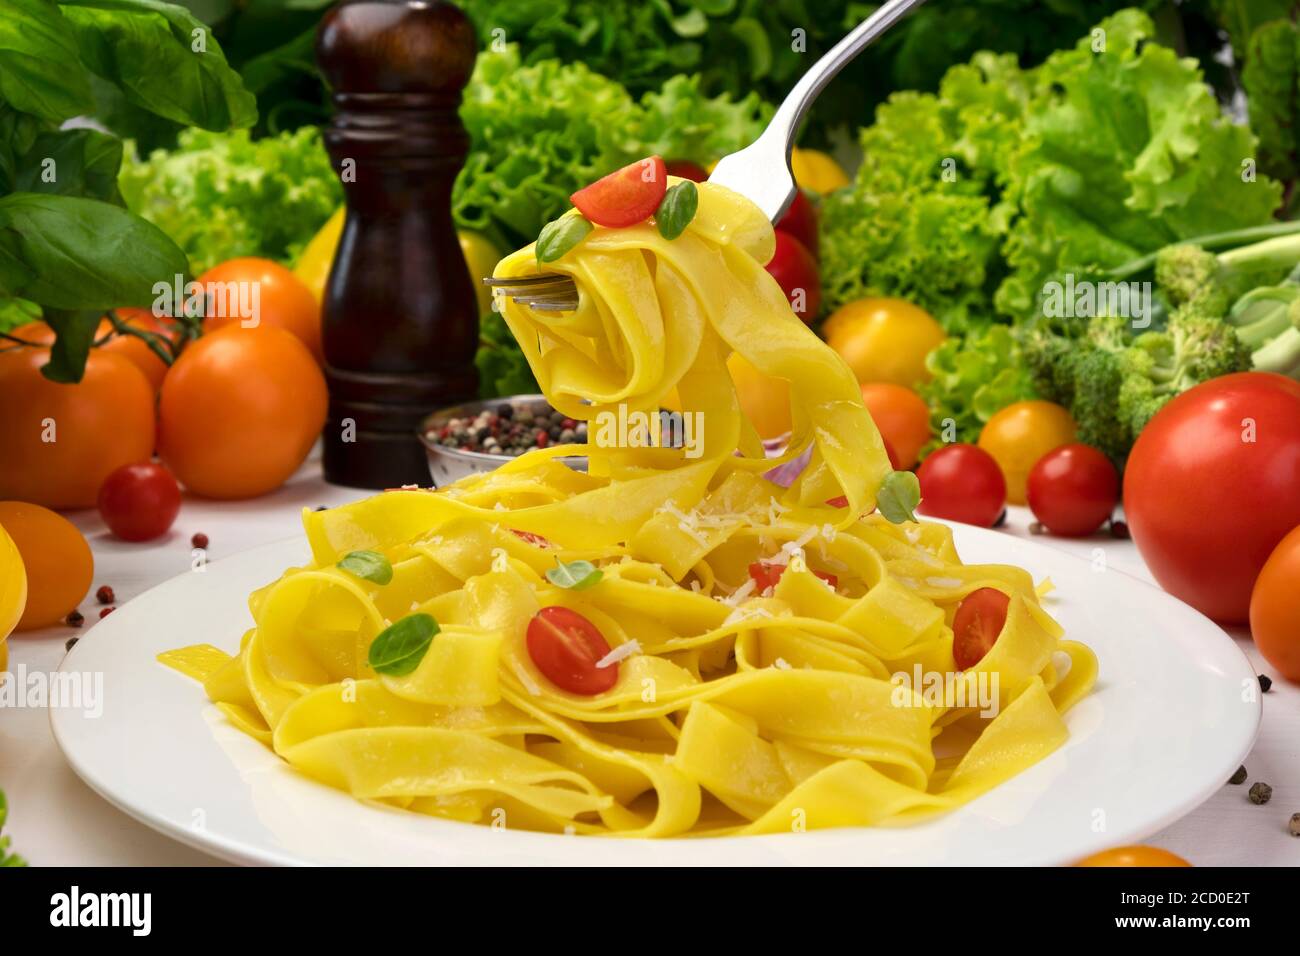 Plate of italian pasta, fettuccine on fork with tomatoes and basil Stock Photo